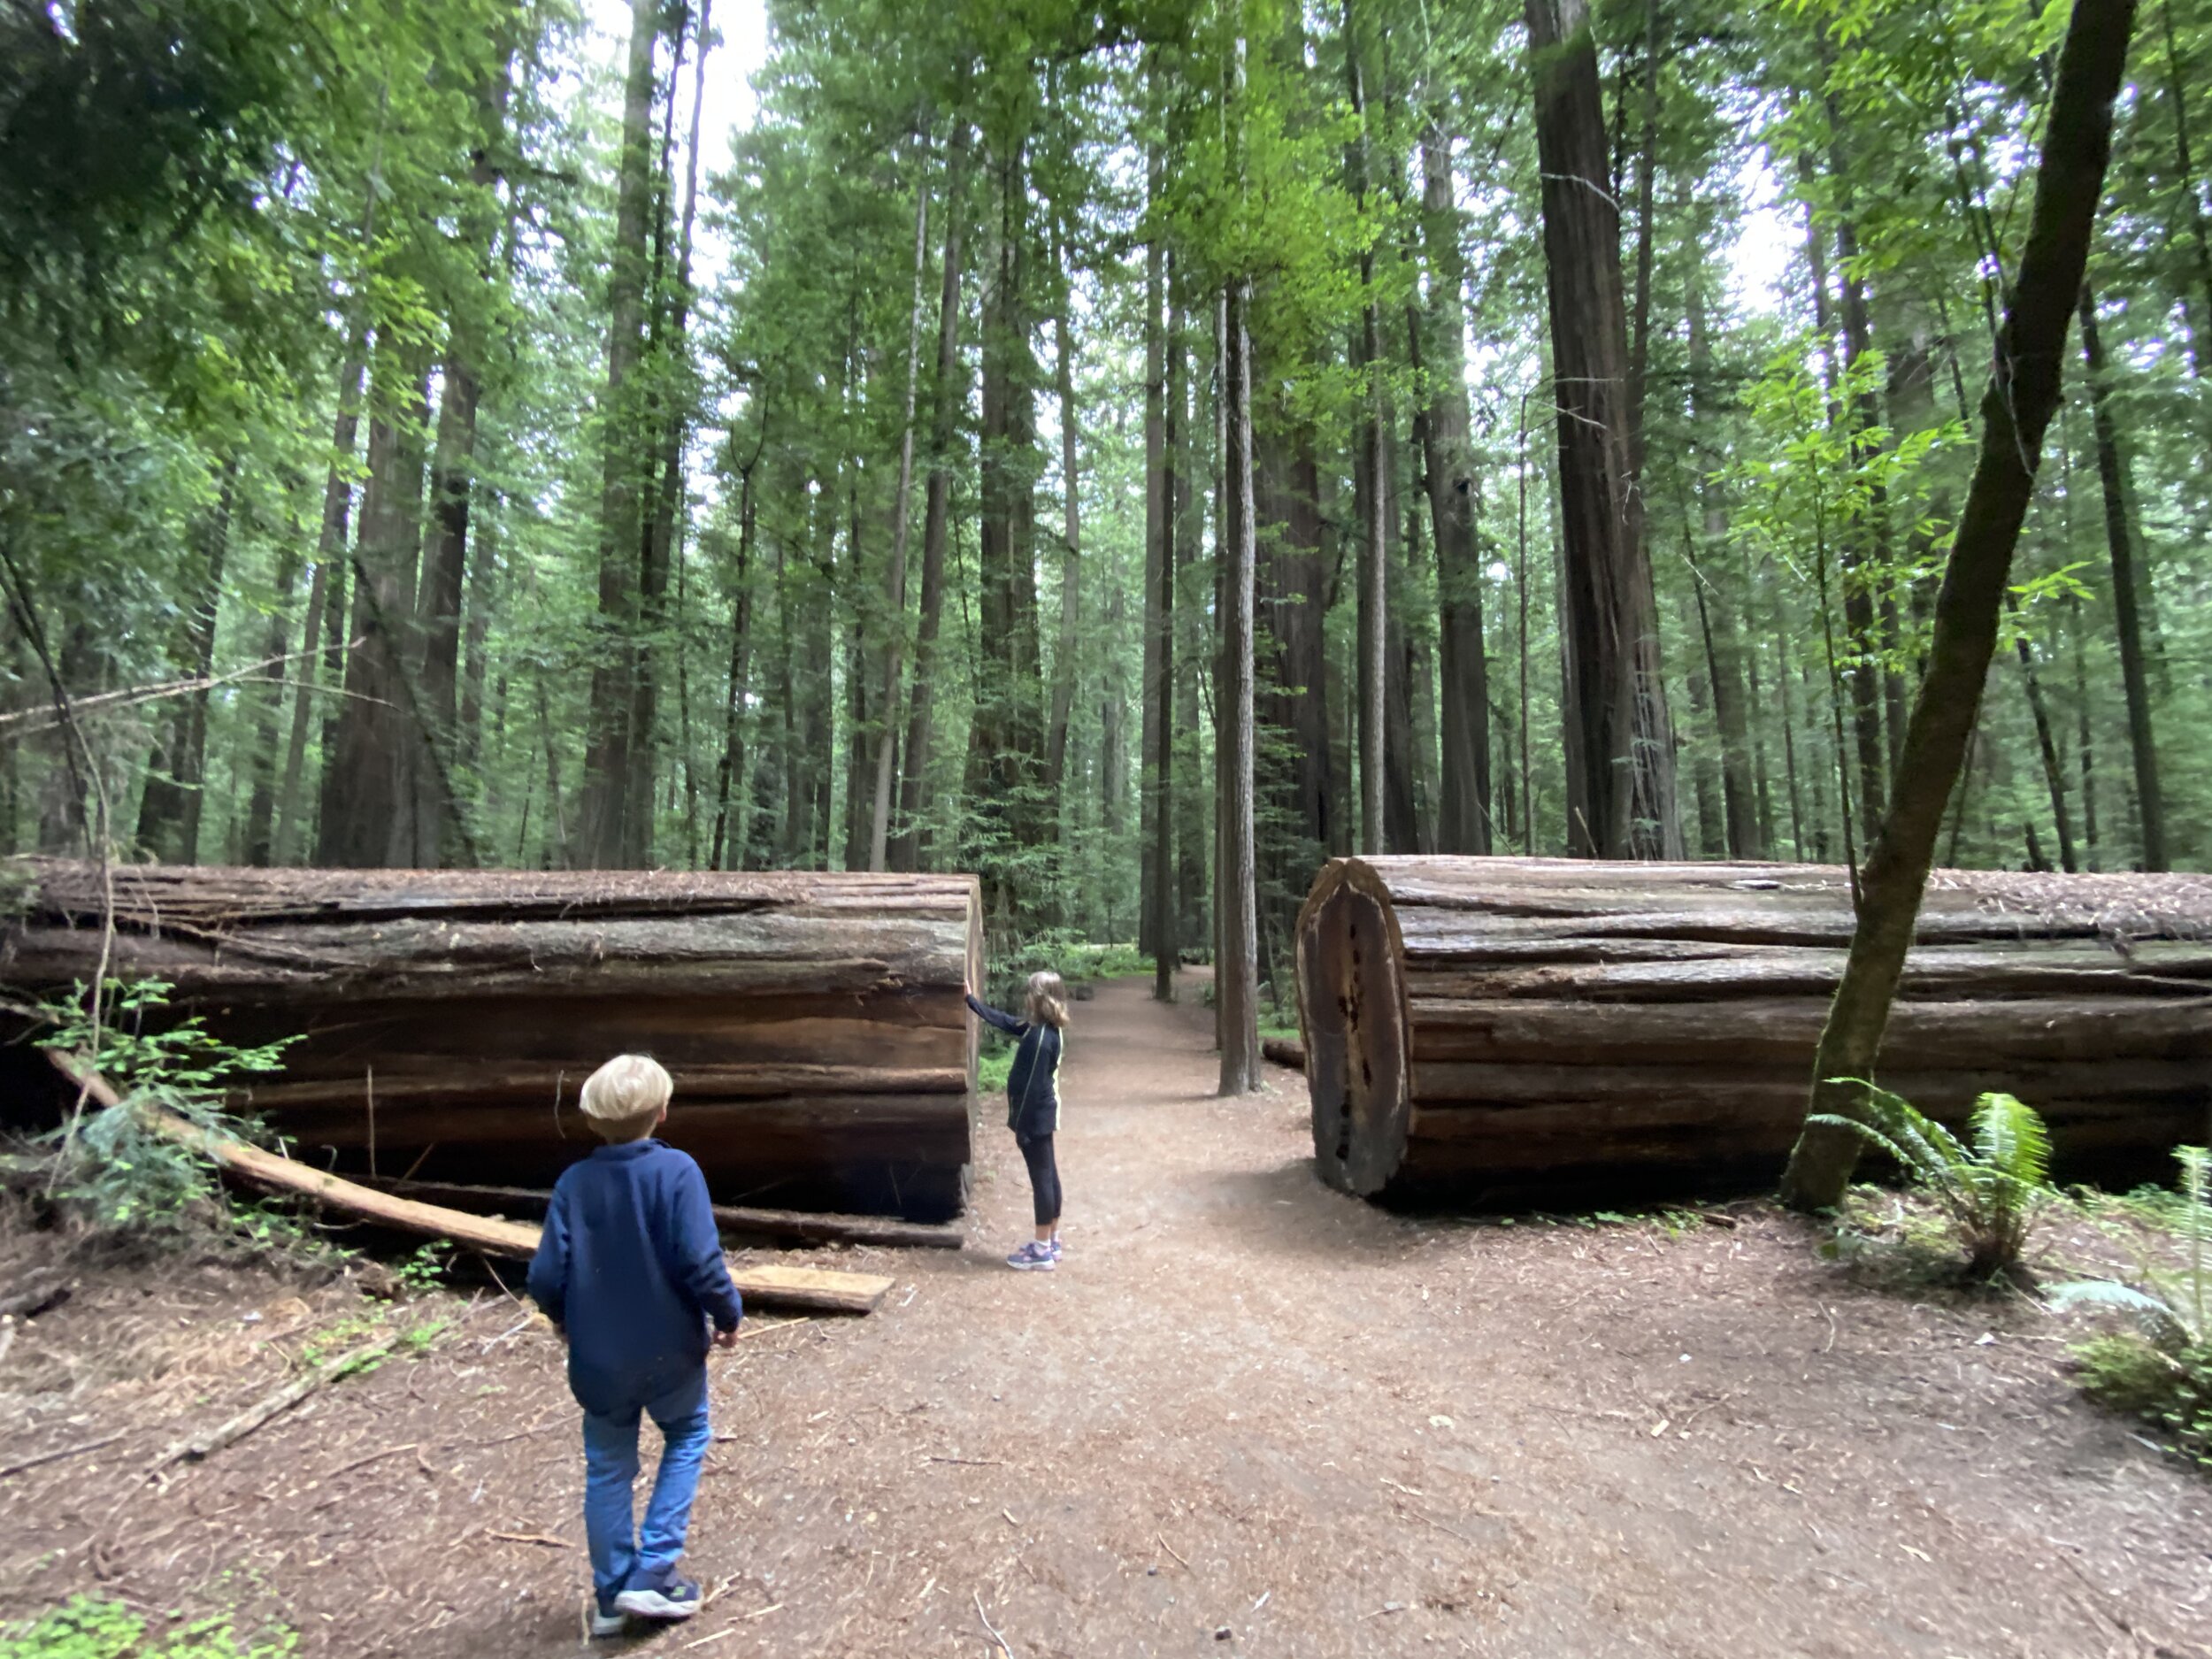 This Redwood fell across the path at some point and had to have a massive part cut and removed from it.  We discussed how they would have even needed to have a big machine to roll the cut piece away! Photo by Karen Boudreaux, June 11, 2021